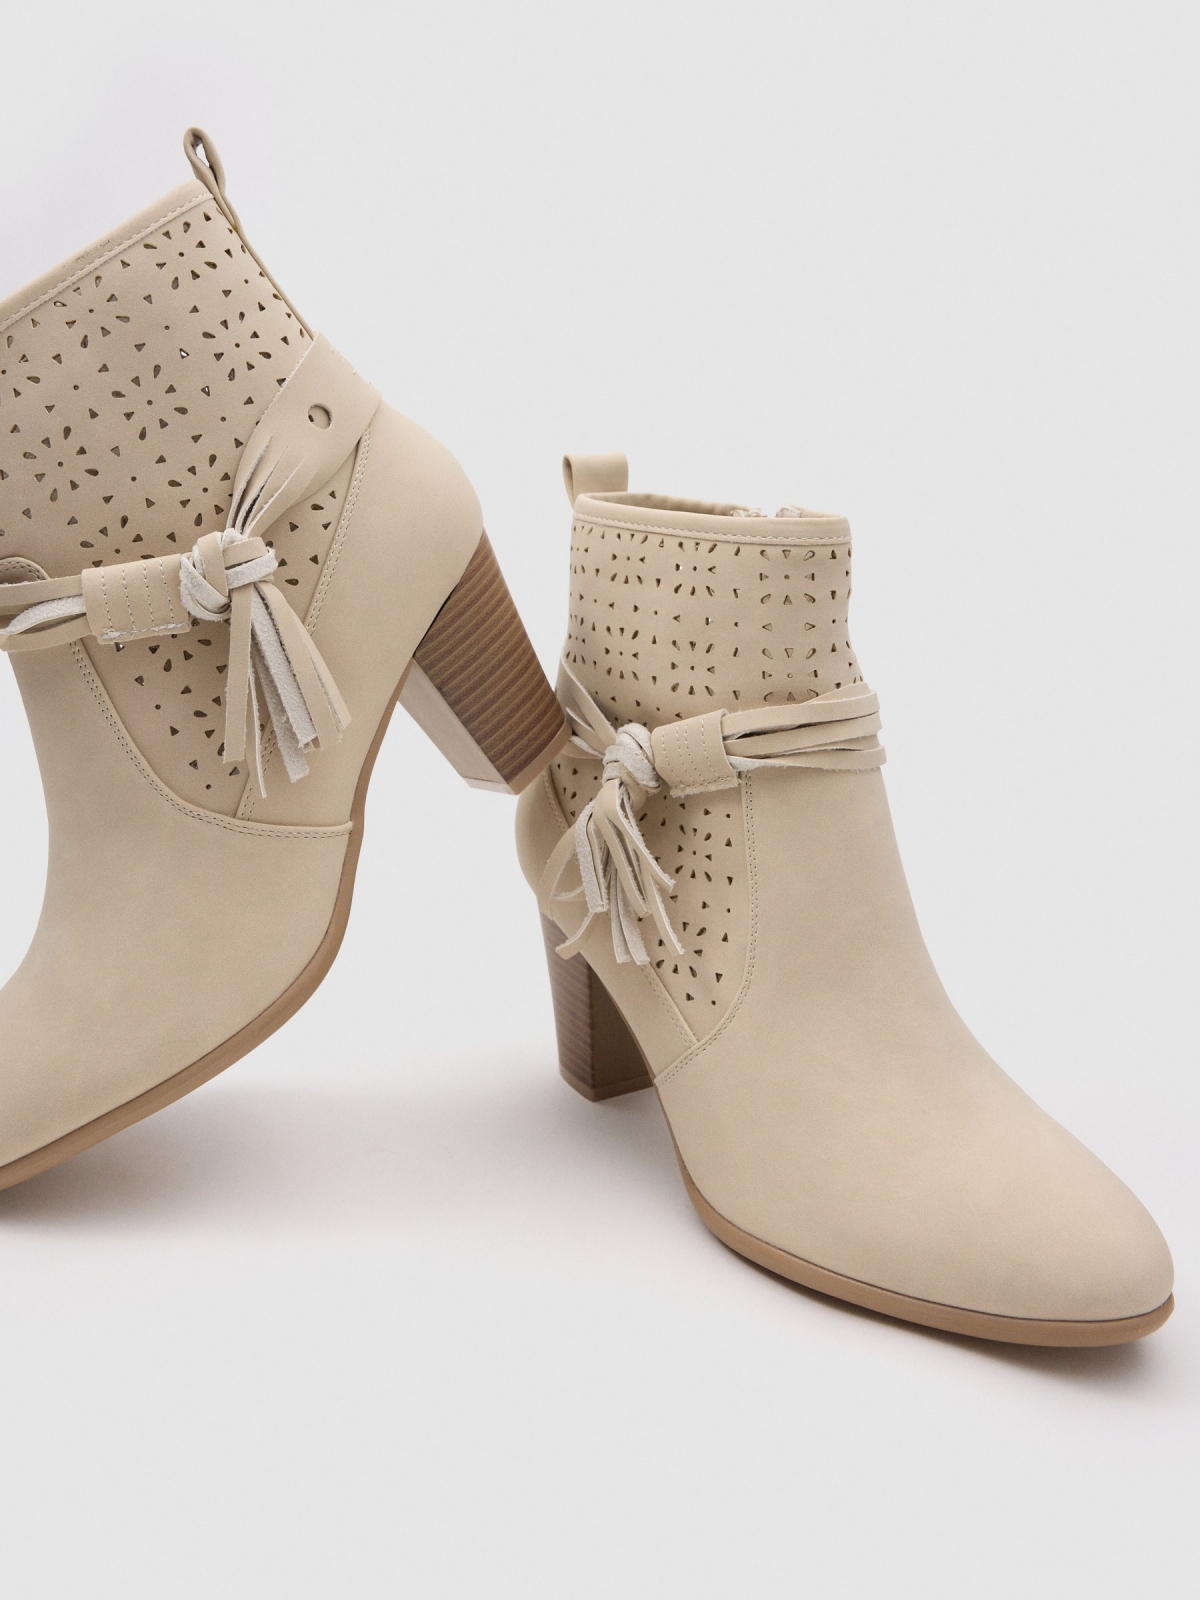 Cream leather-effect medium heel ankle boot with die-cut side bow sand detail view